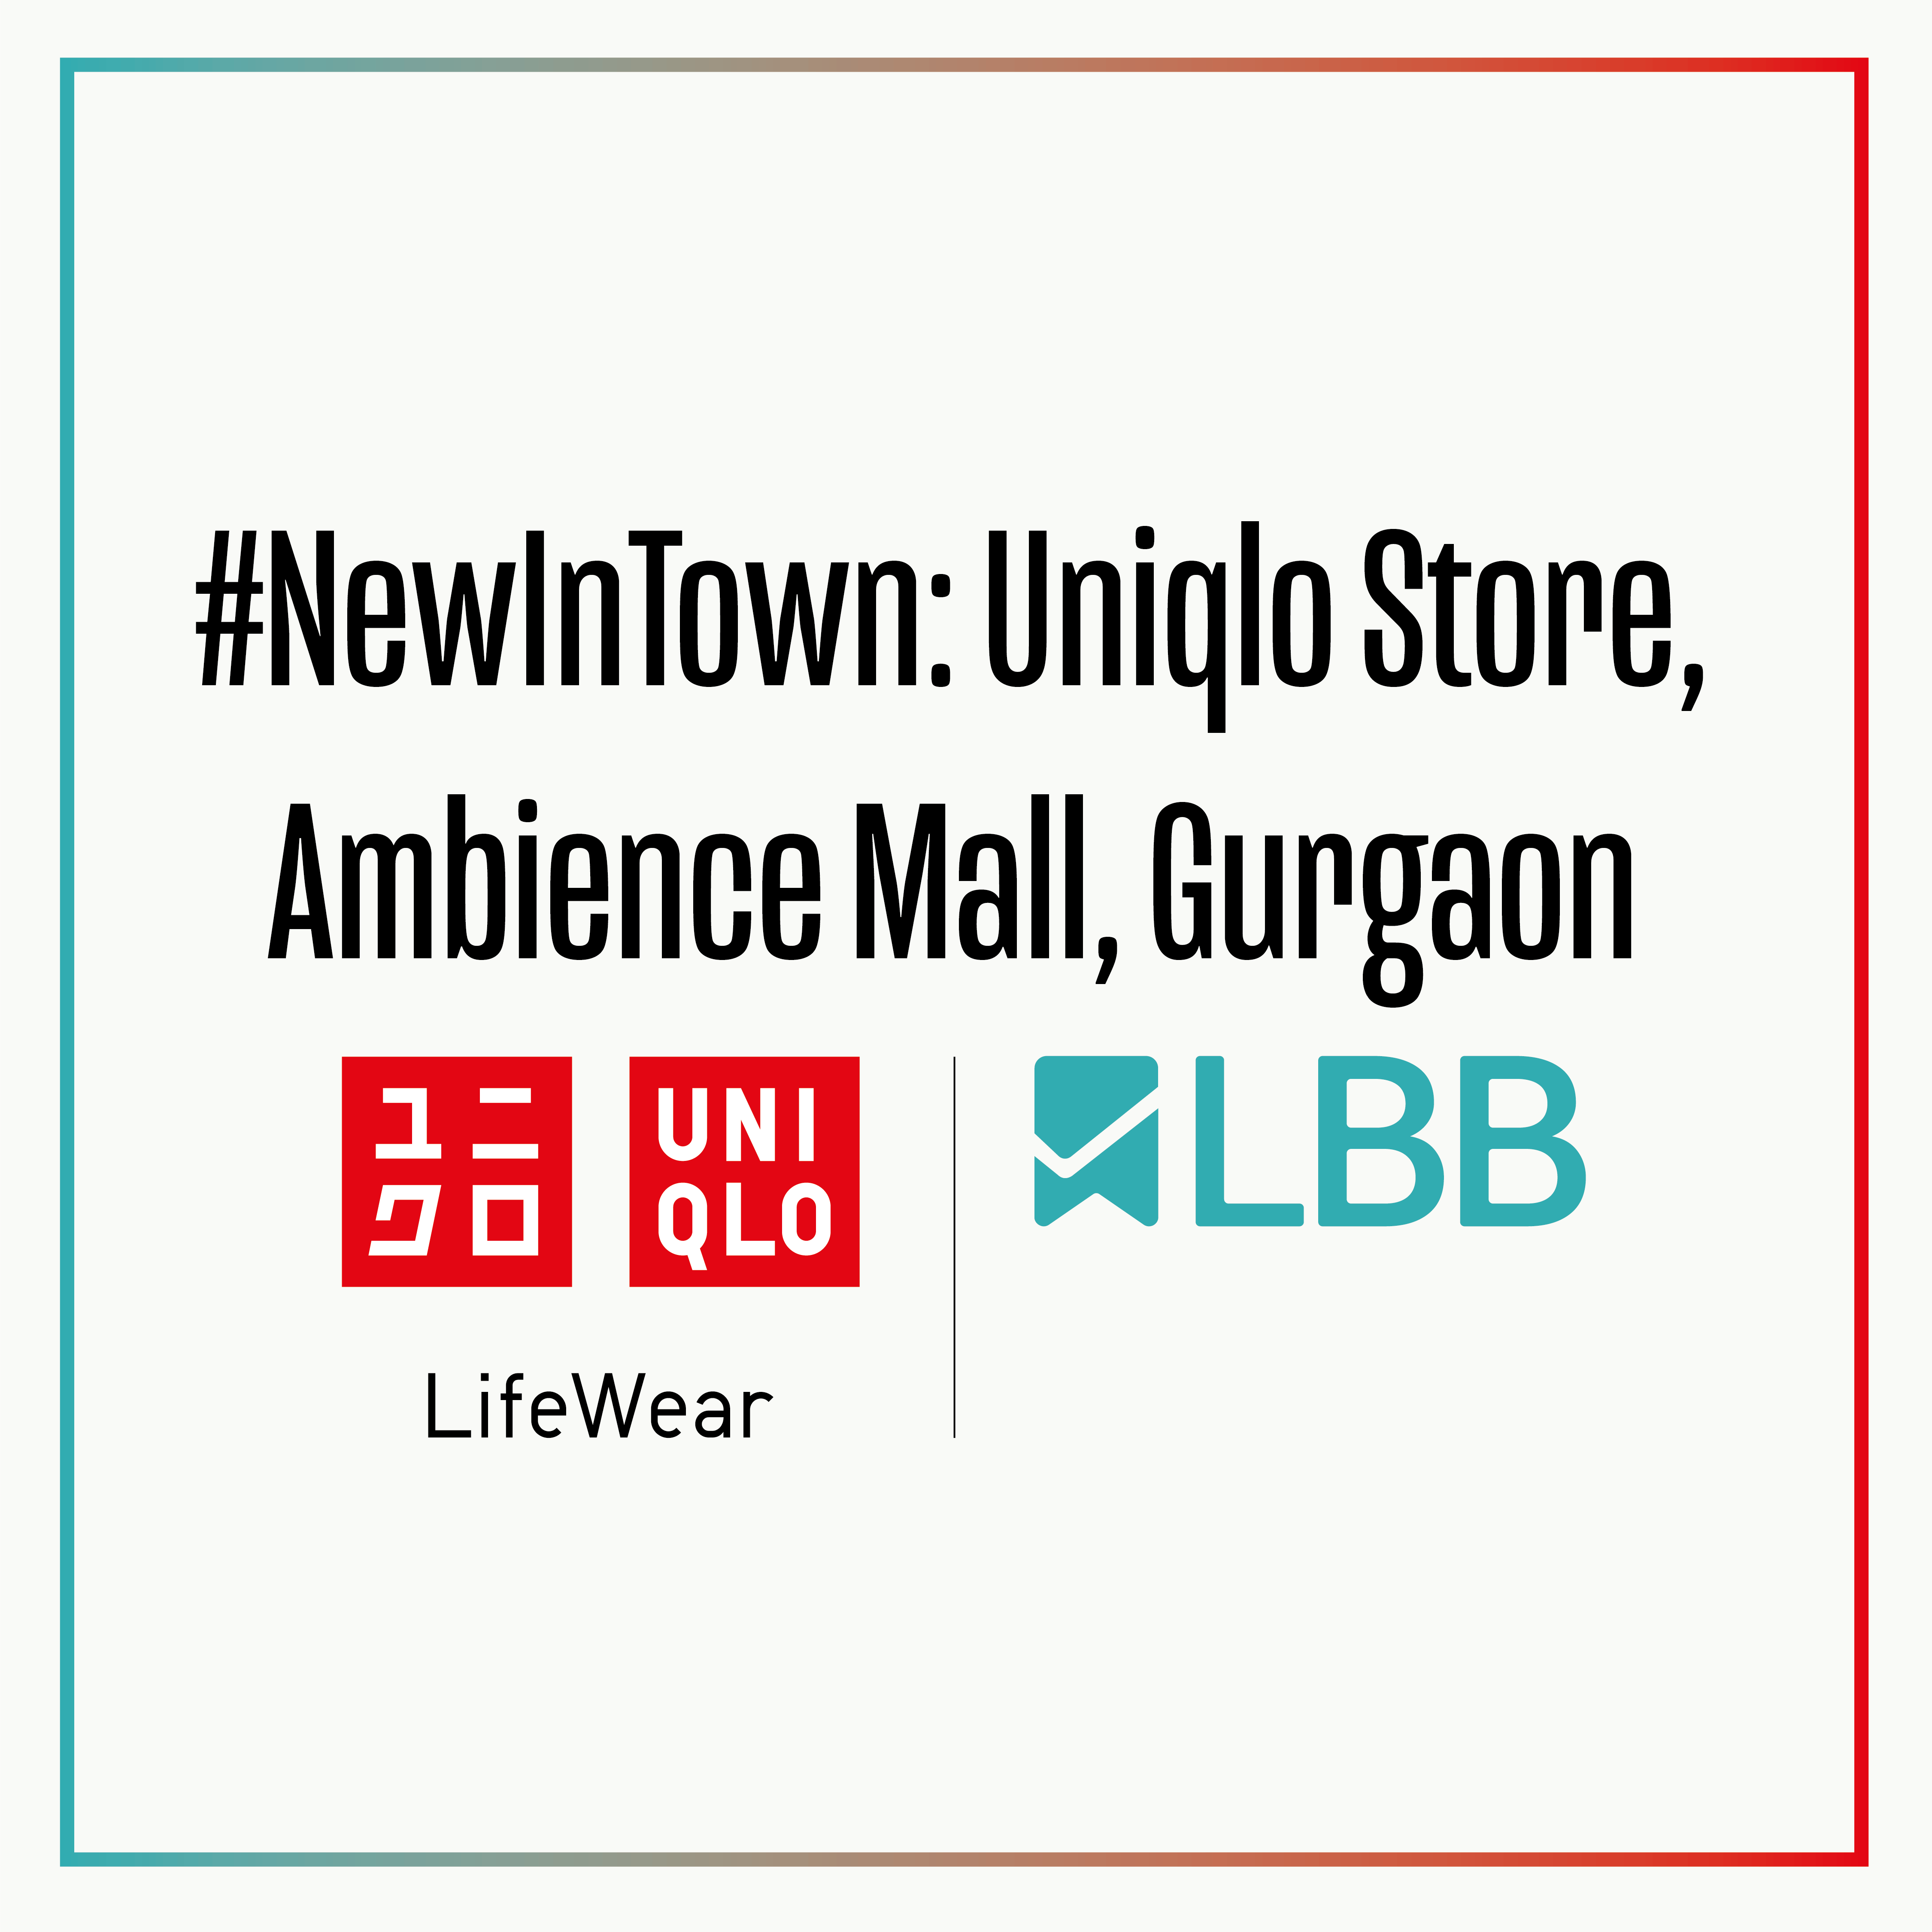 UNIQLO Unveils India Plans  Announces 3 Stores in Delhi Area with the  first to Open in October  FAST RETAILING CO LTD